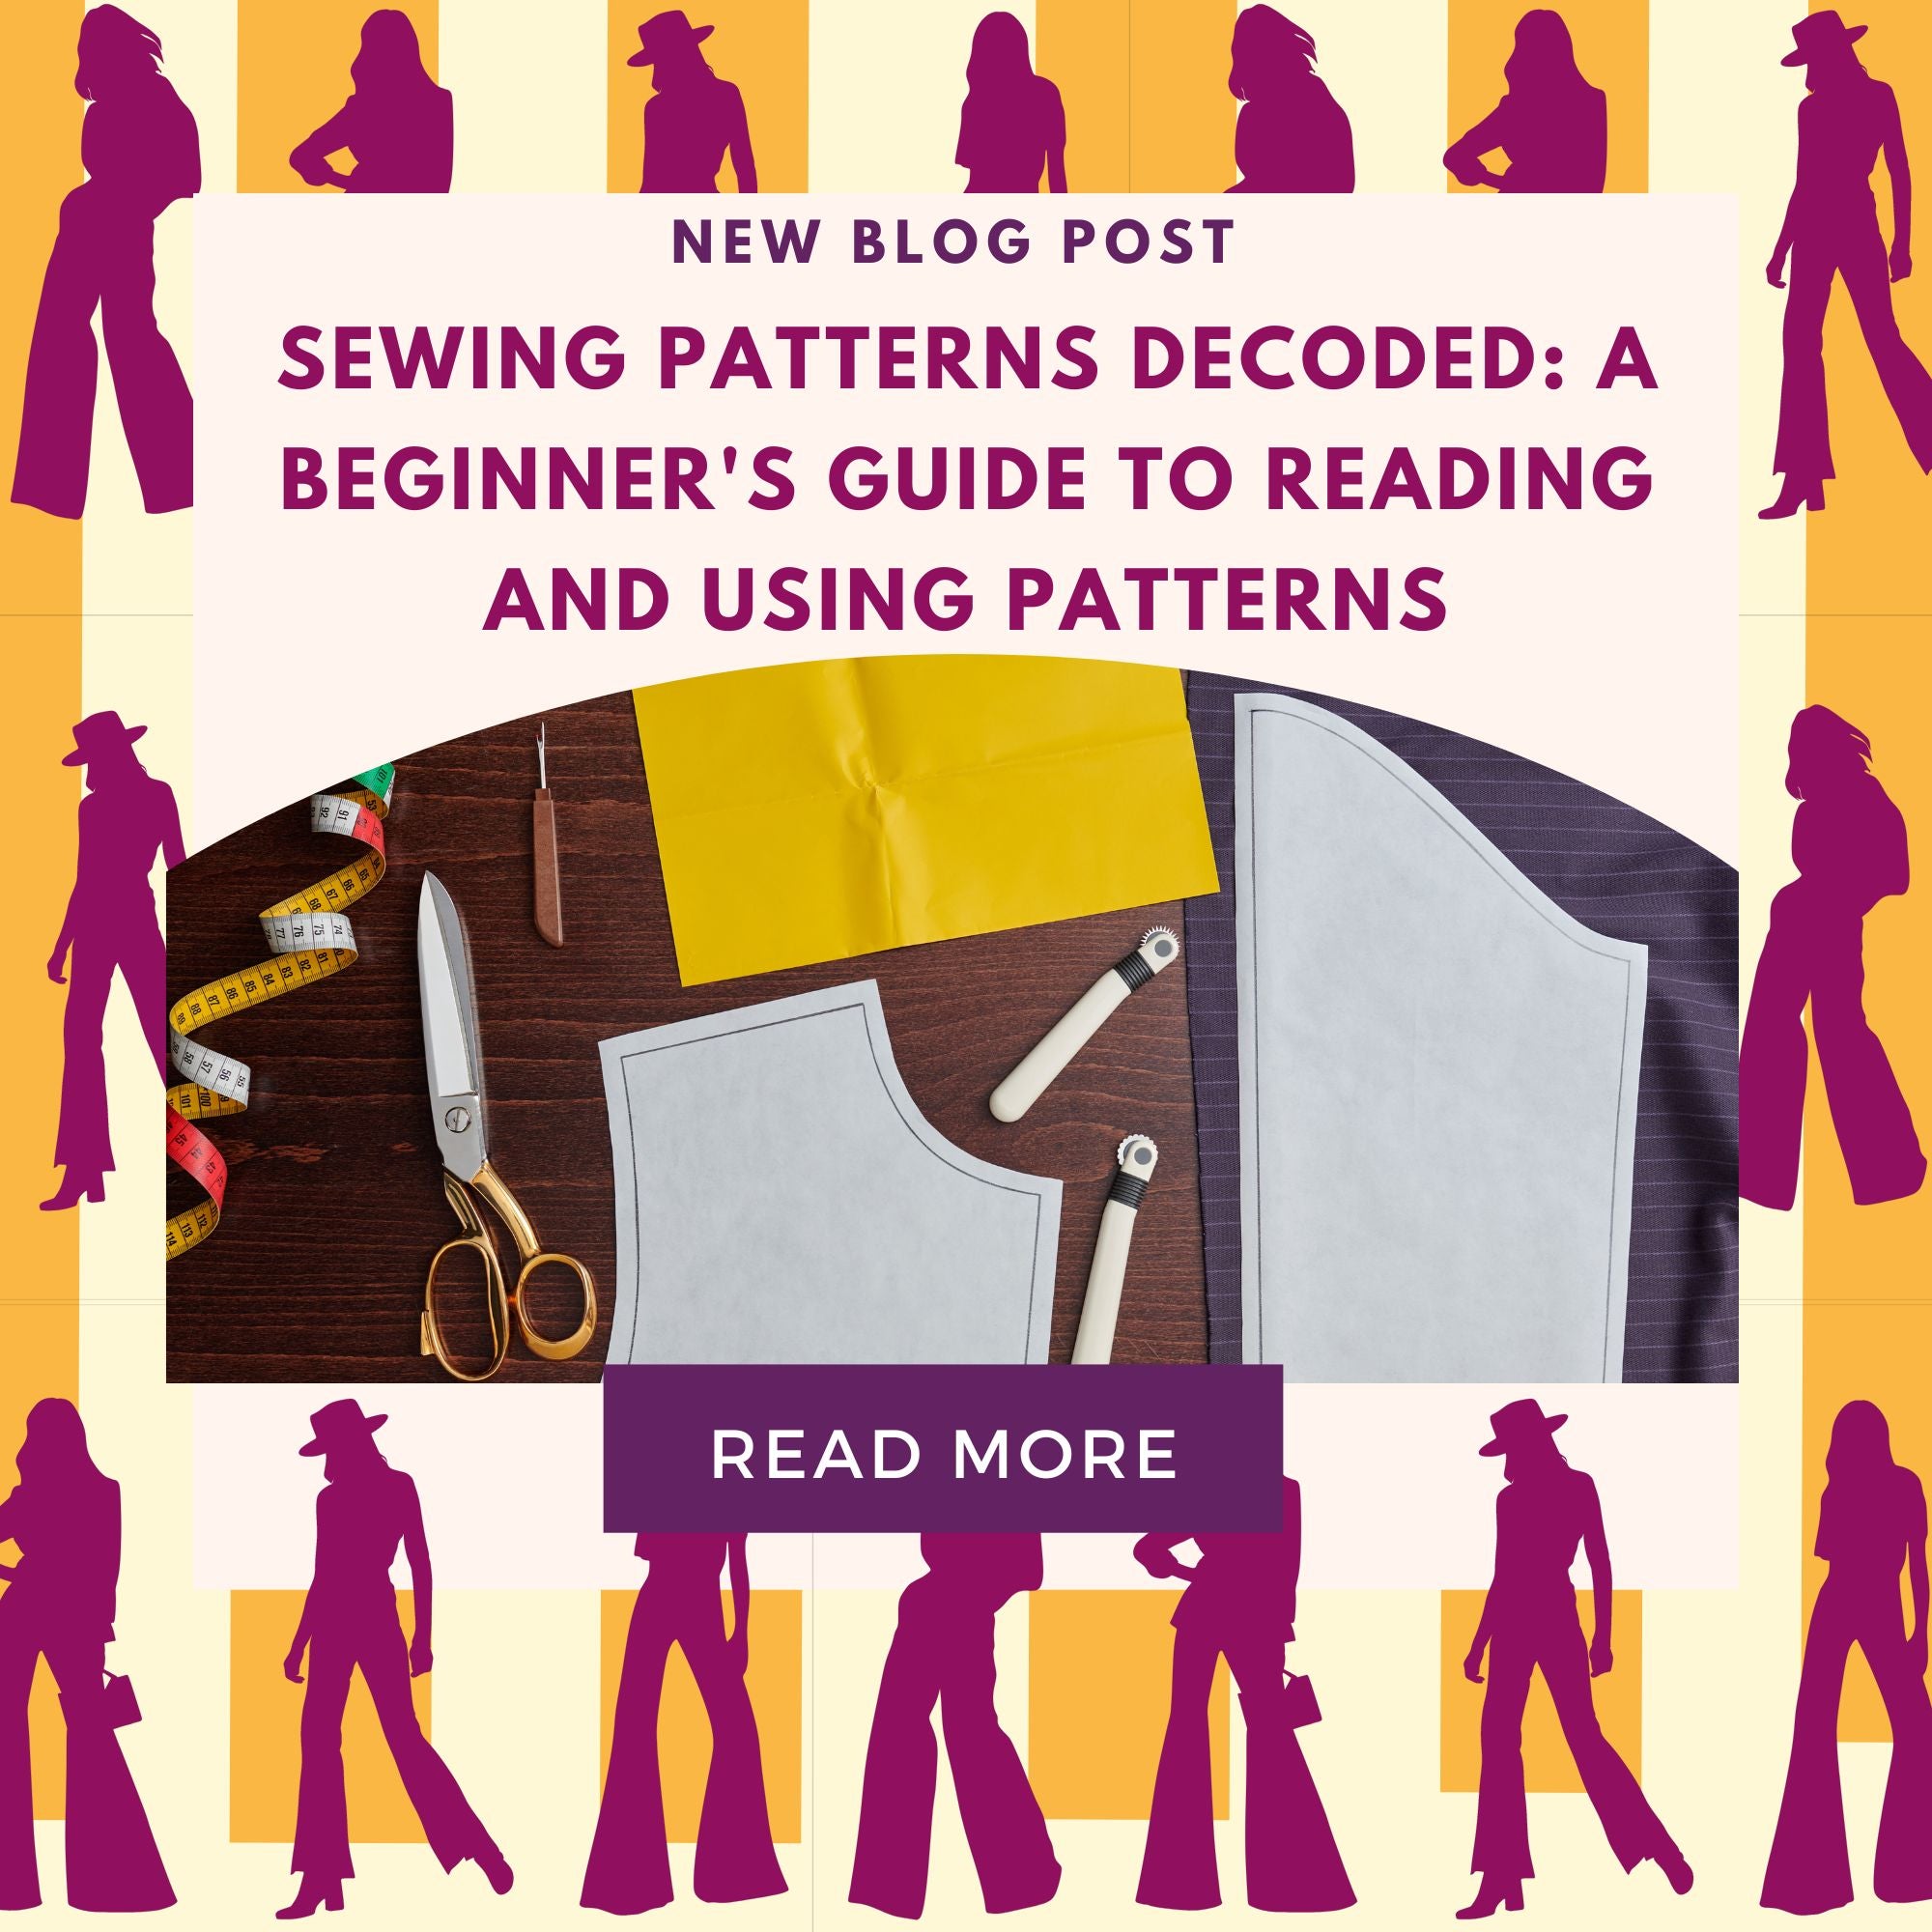 Sewing Patterns Decoded: A Beginner's Guide to Reading and Using Patterns